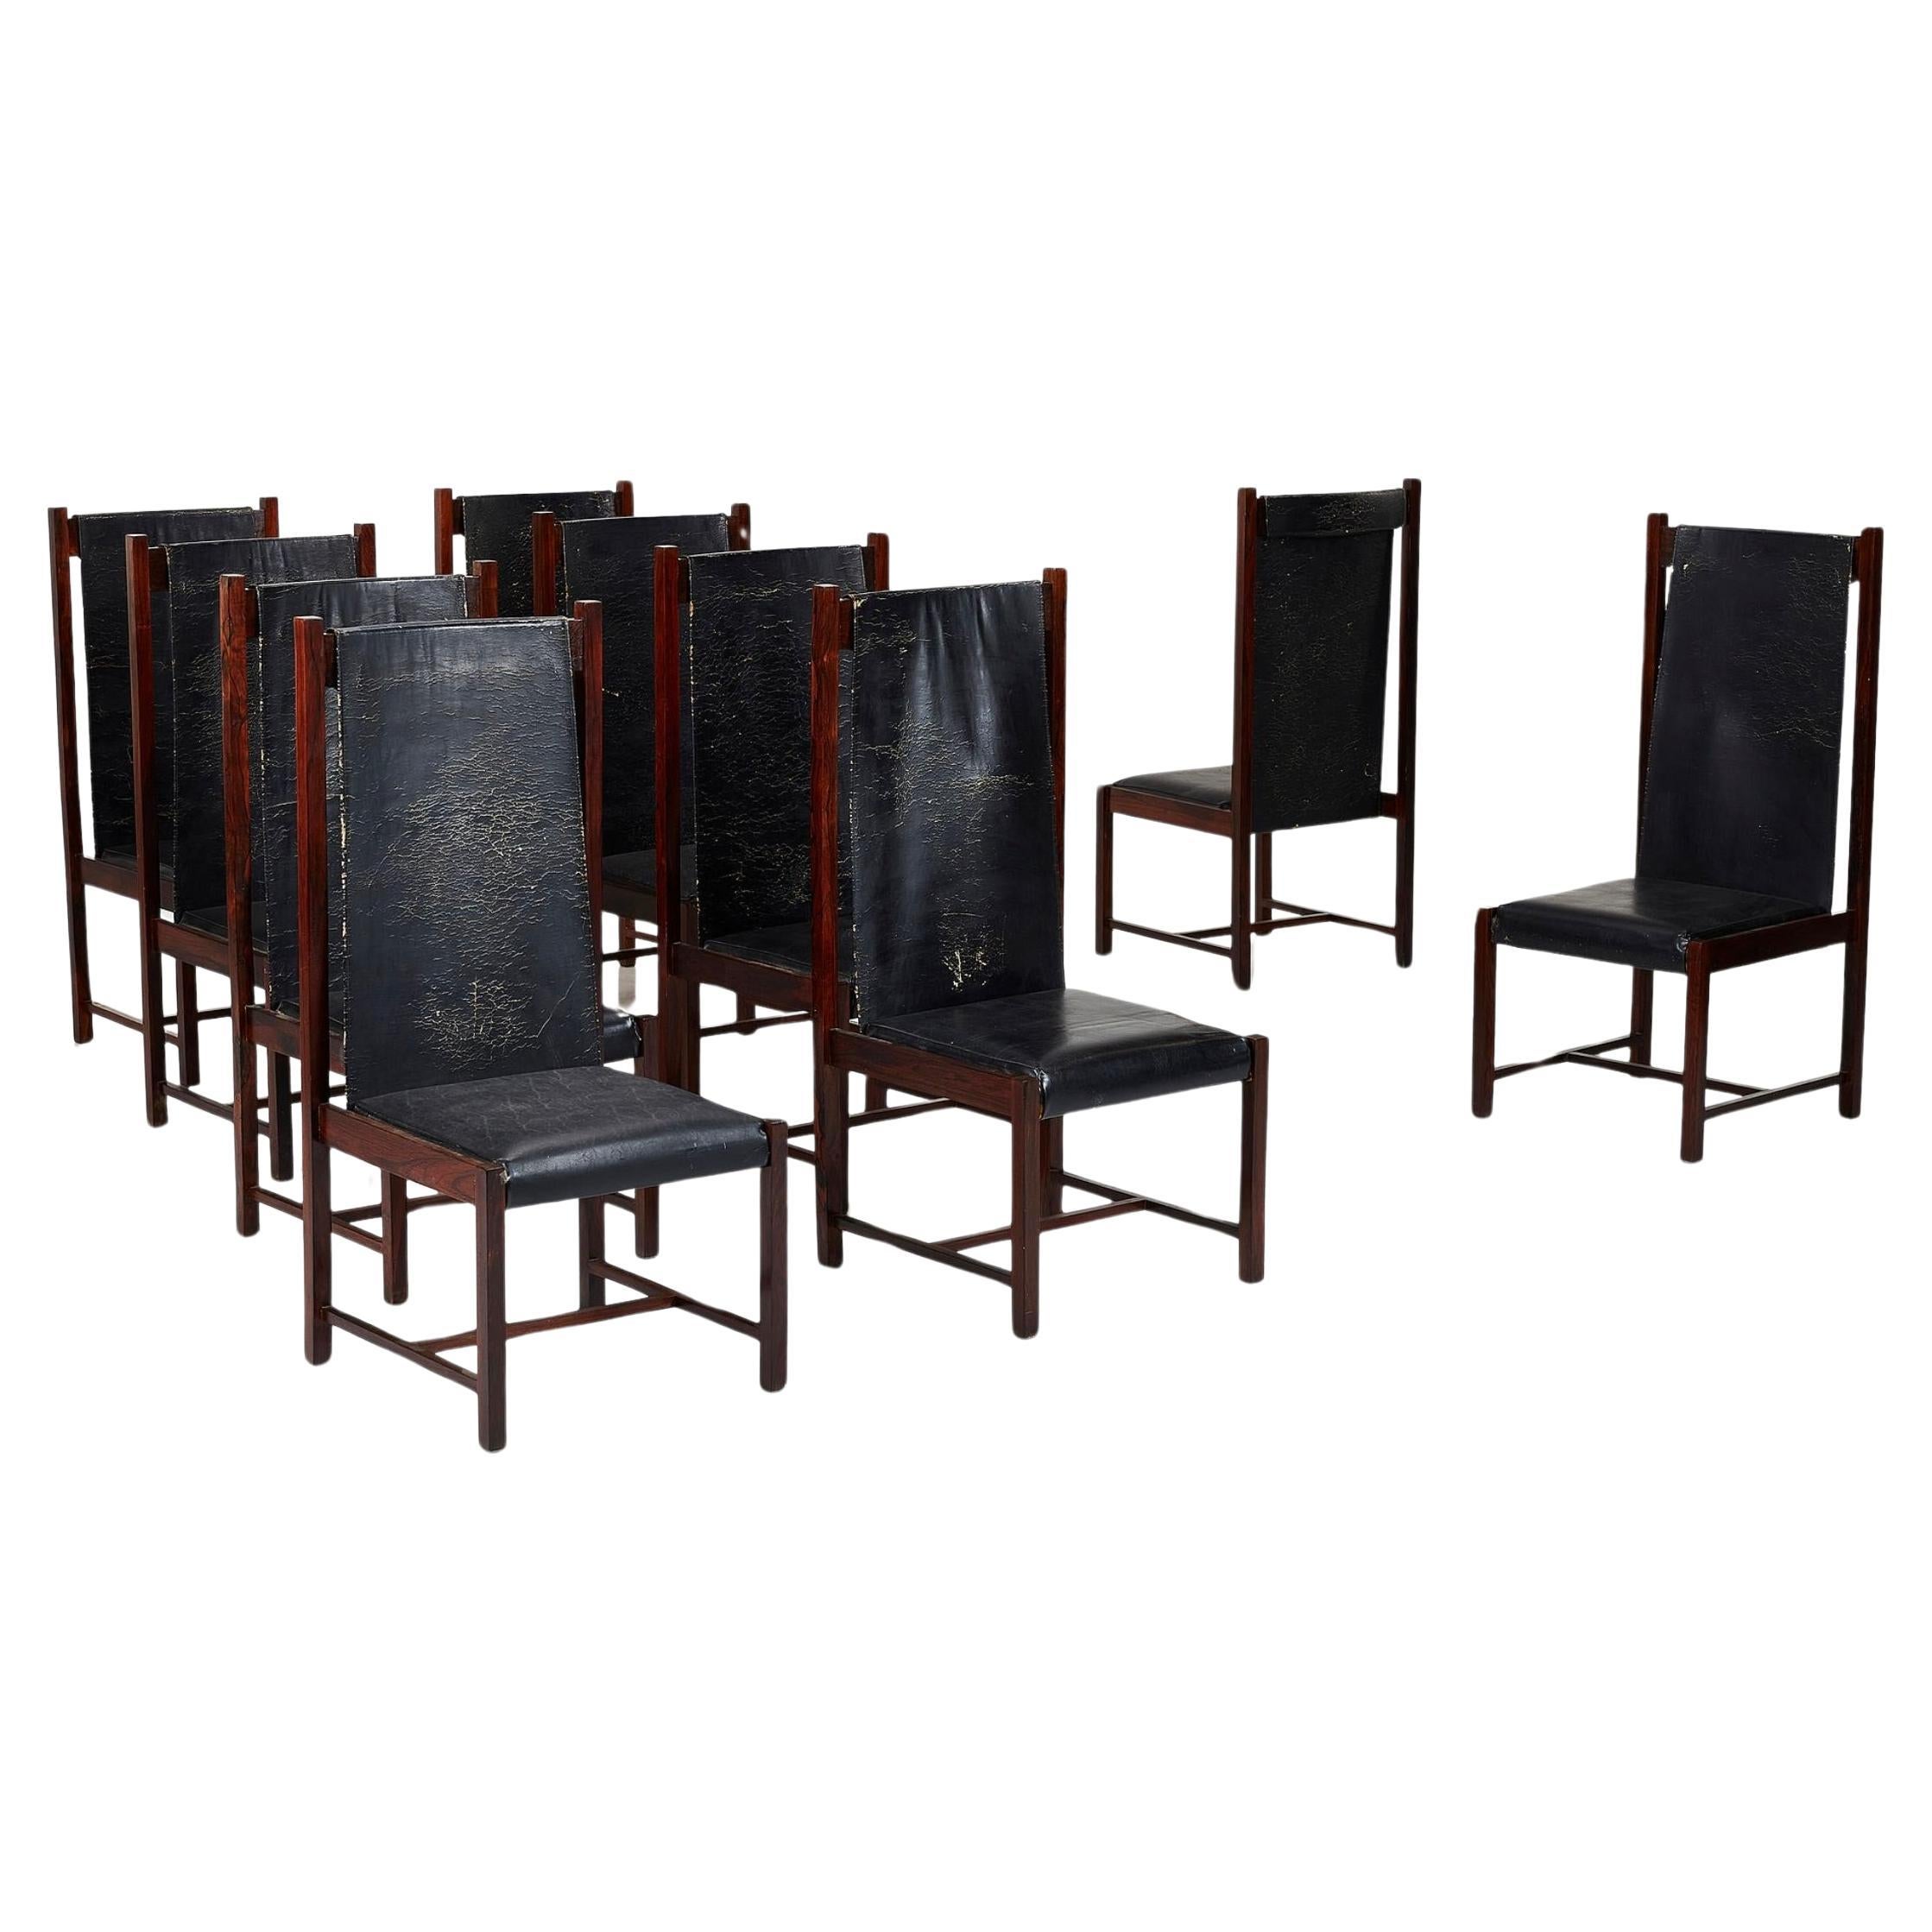 10 Celina Decoracoes High Back Dining Chairs, Brazil c 1965 For Sale